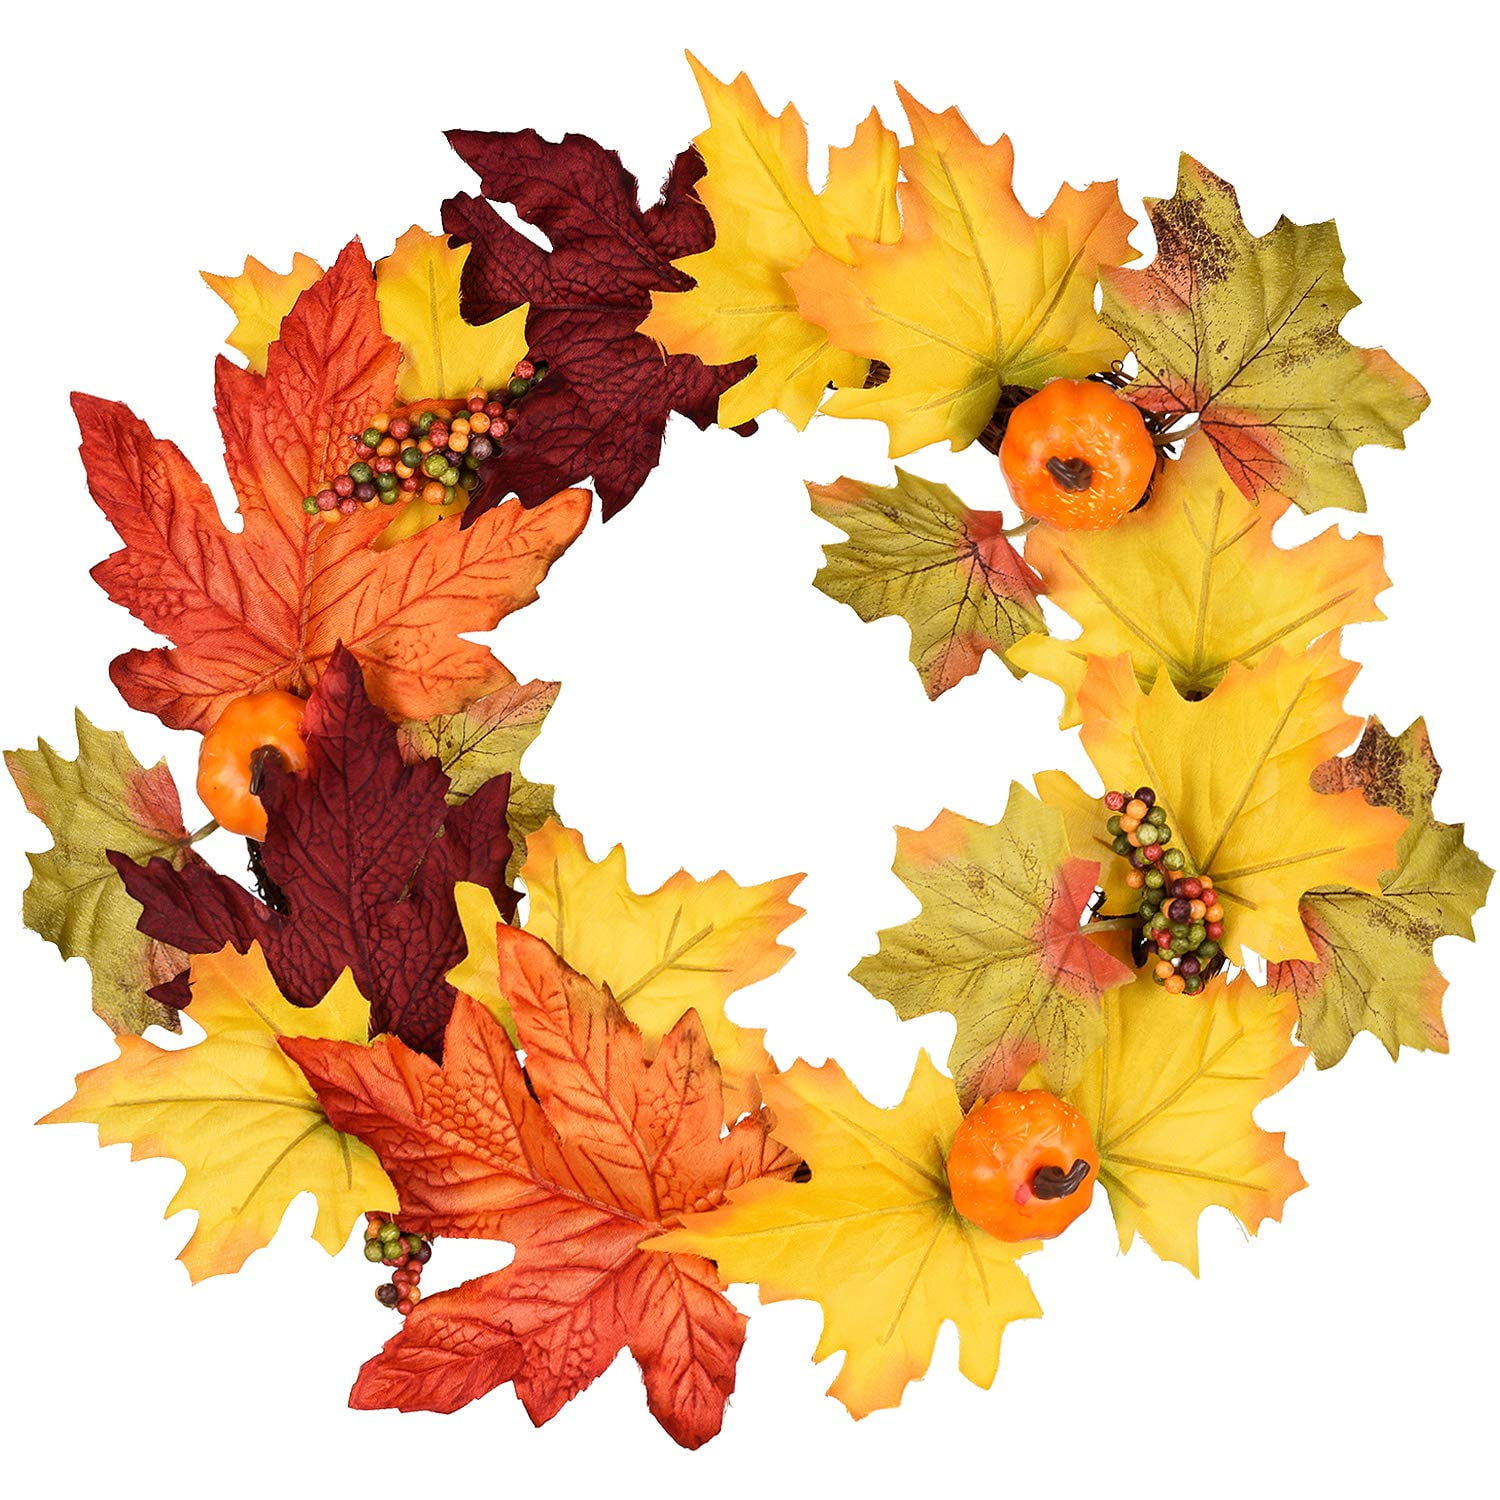 Festive Fall Thanksgiving Leaf Candle Ring Decoration Decor with Fake Leaves NEW 